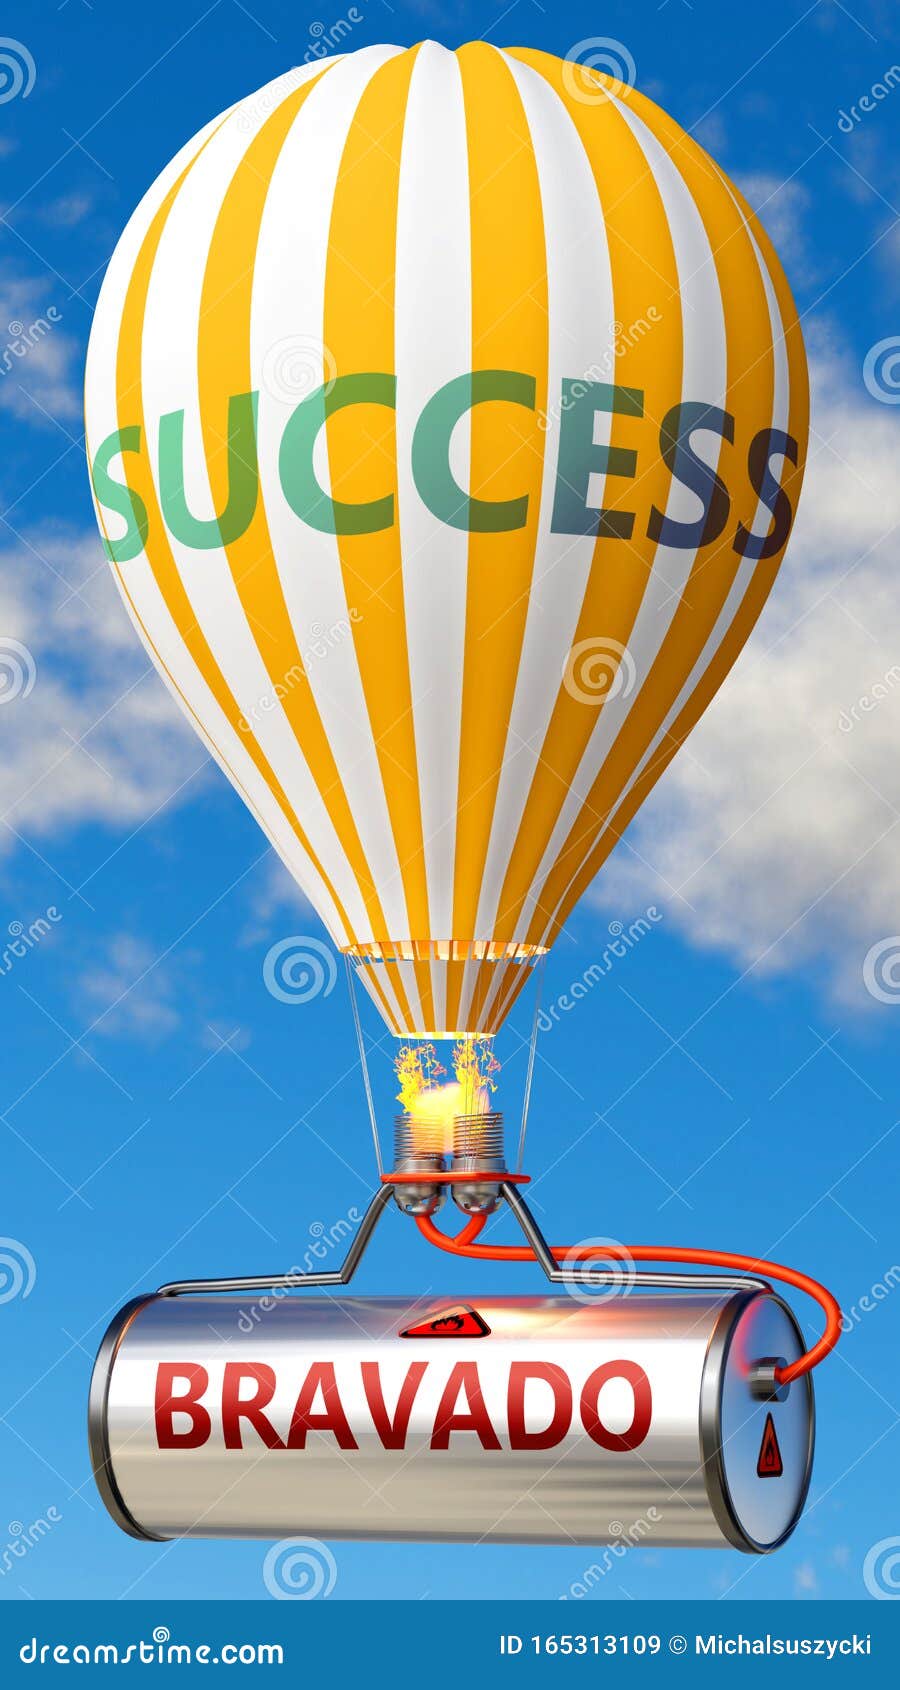 https://thumbs.dreamstime.com/z/bravado-success-shown-as-word-fuel-tank-balloon-to-symbolize-contribute-business-life-d-illustration-165313109.jpg